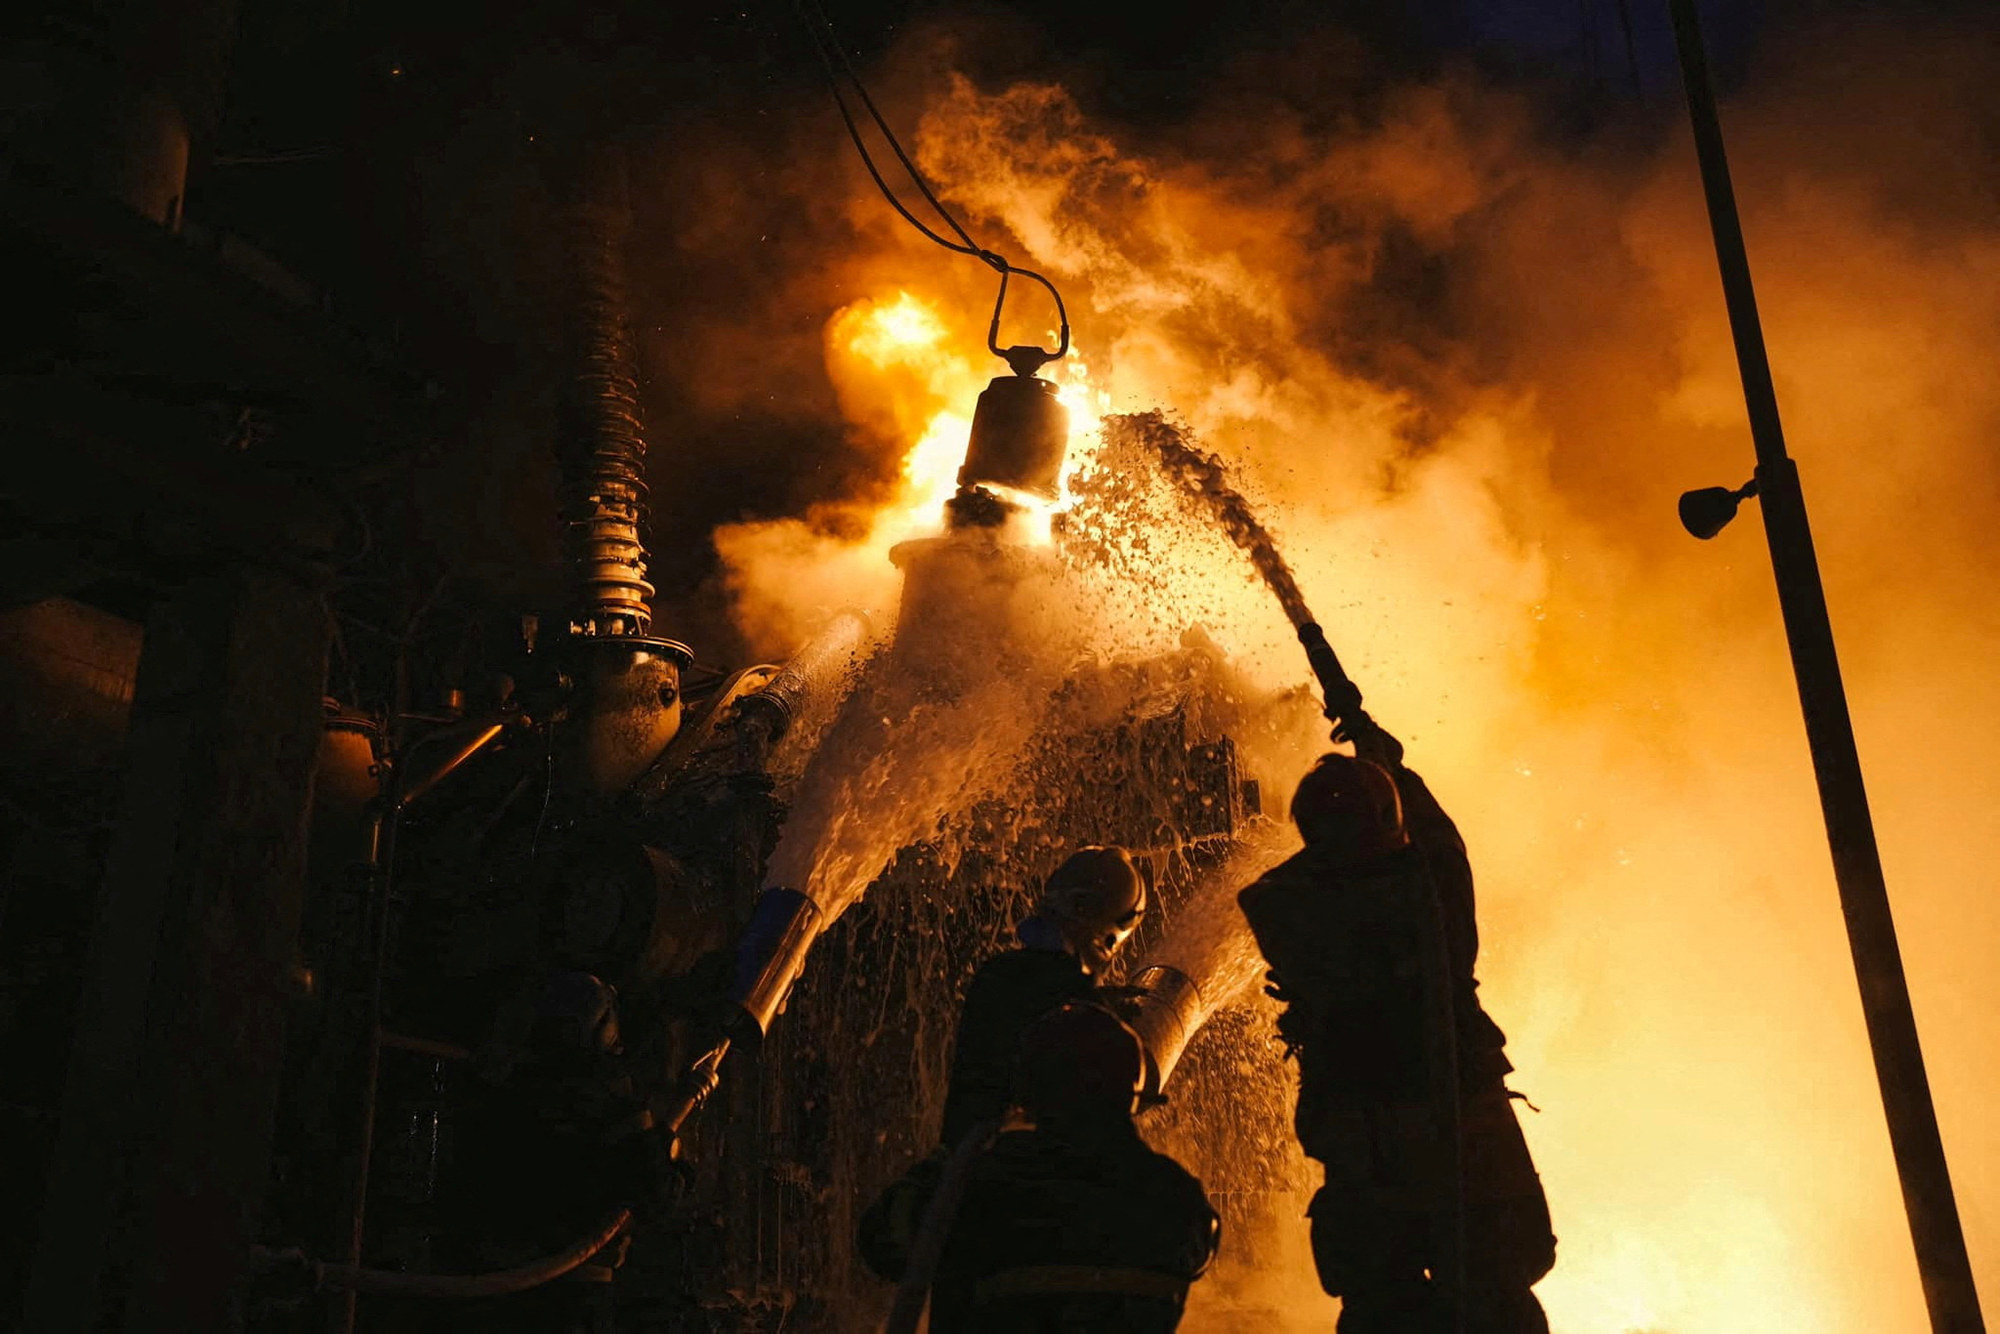 Firefighters pouring water upward at a blazing structure at night